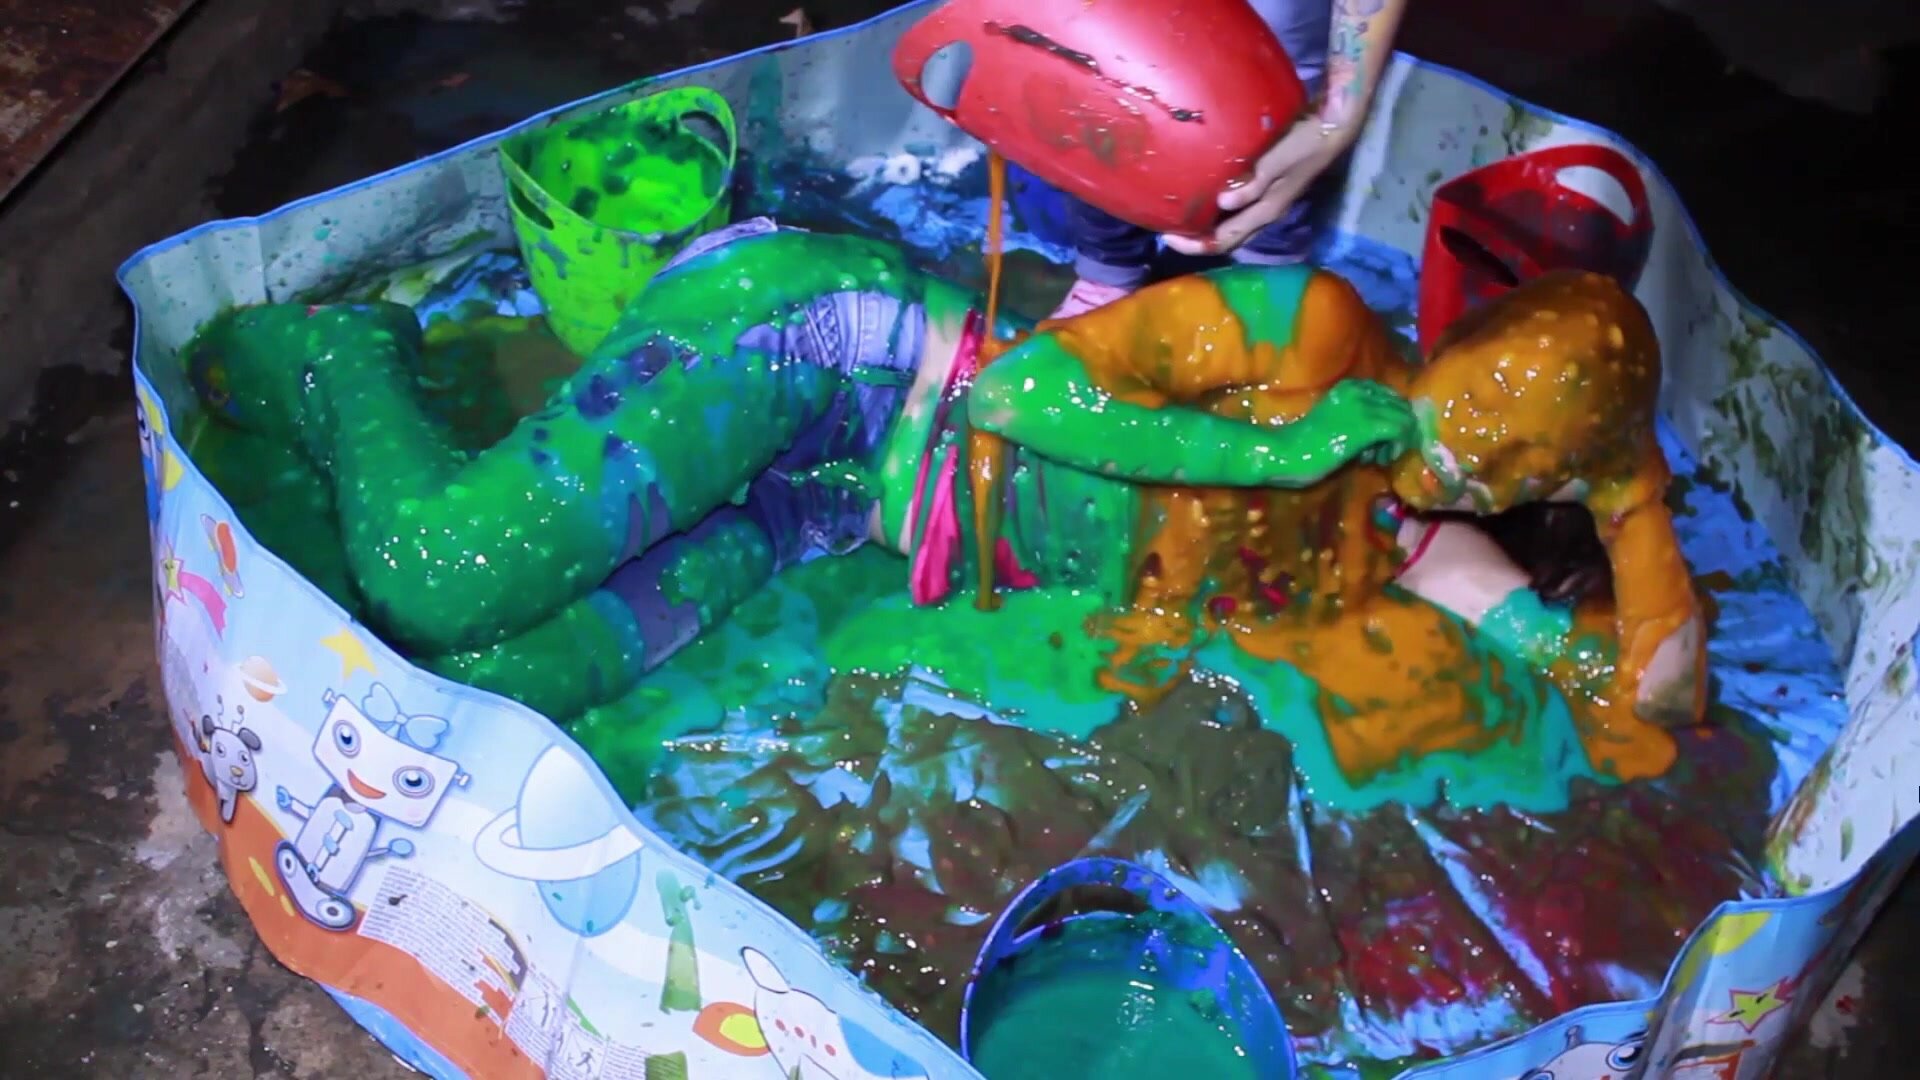 Wetting and slimed - video 2